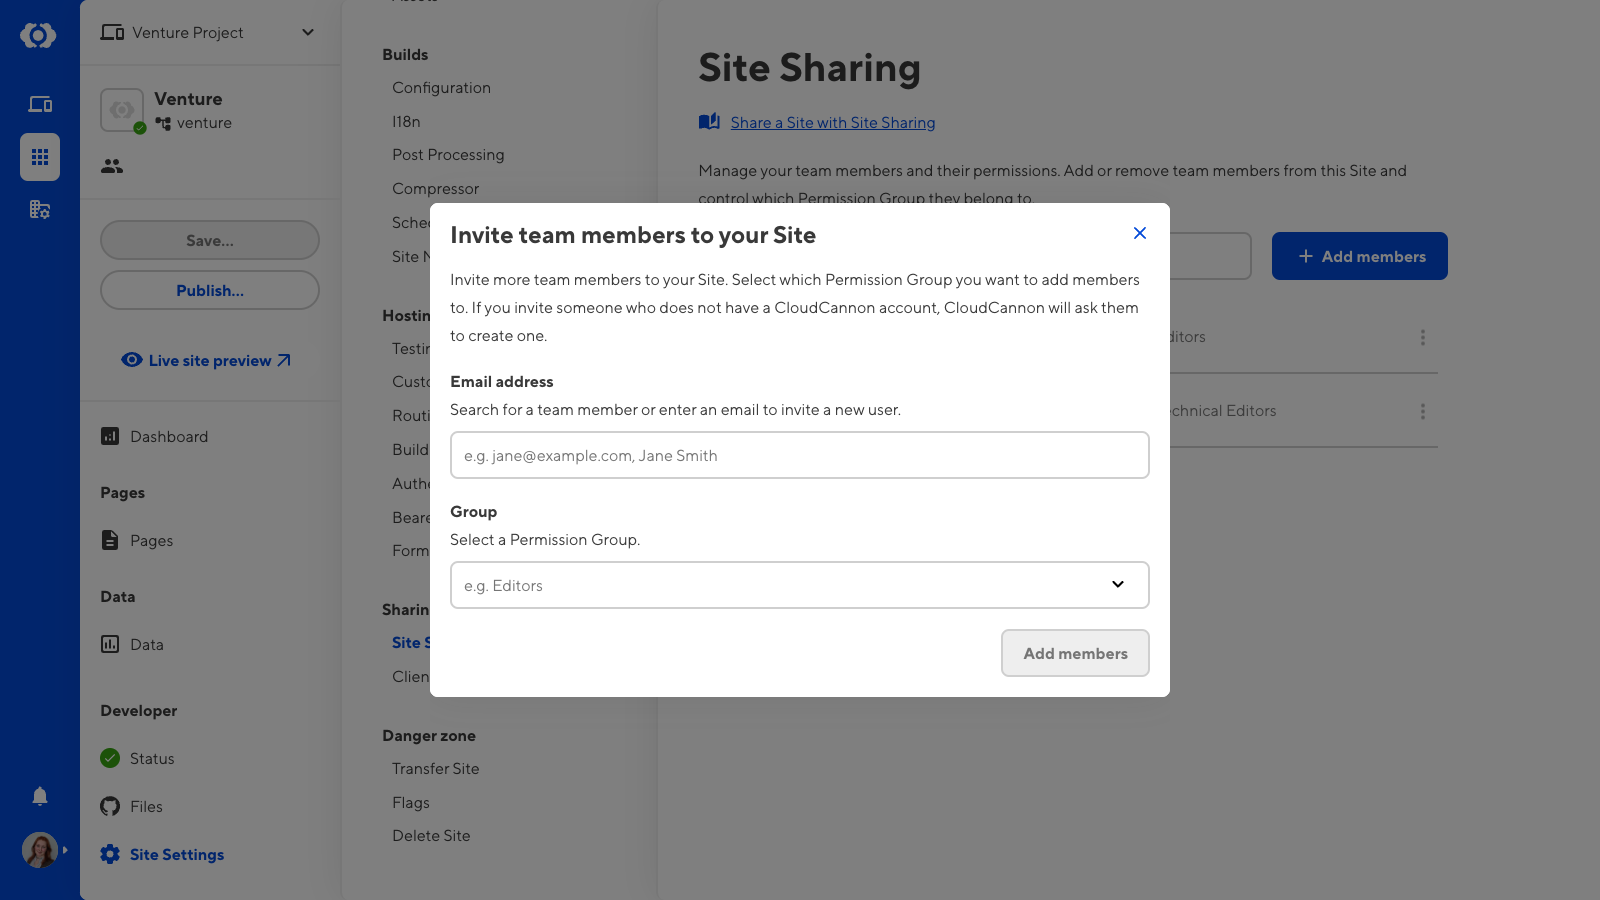 A screenshot of the Invite Team Members to Site modal shows two fields, one for names and one for Permission Groups.